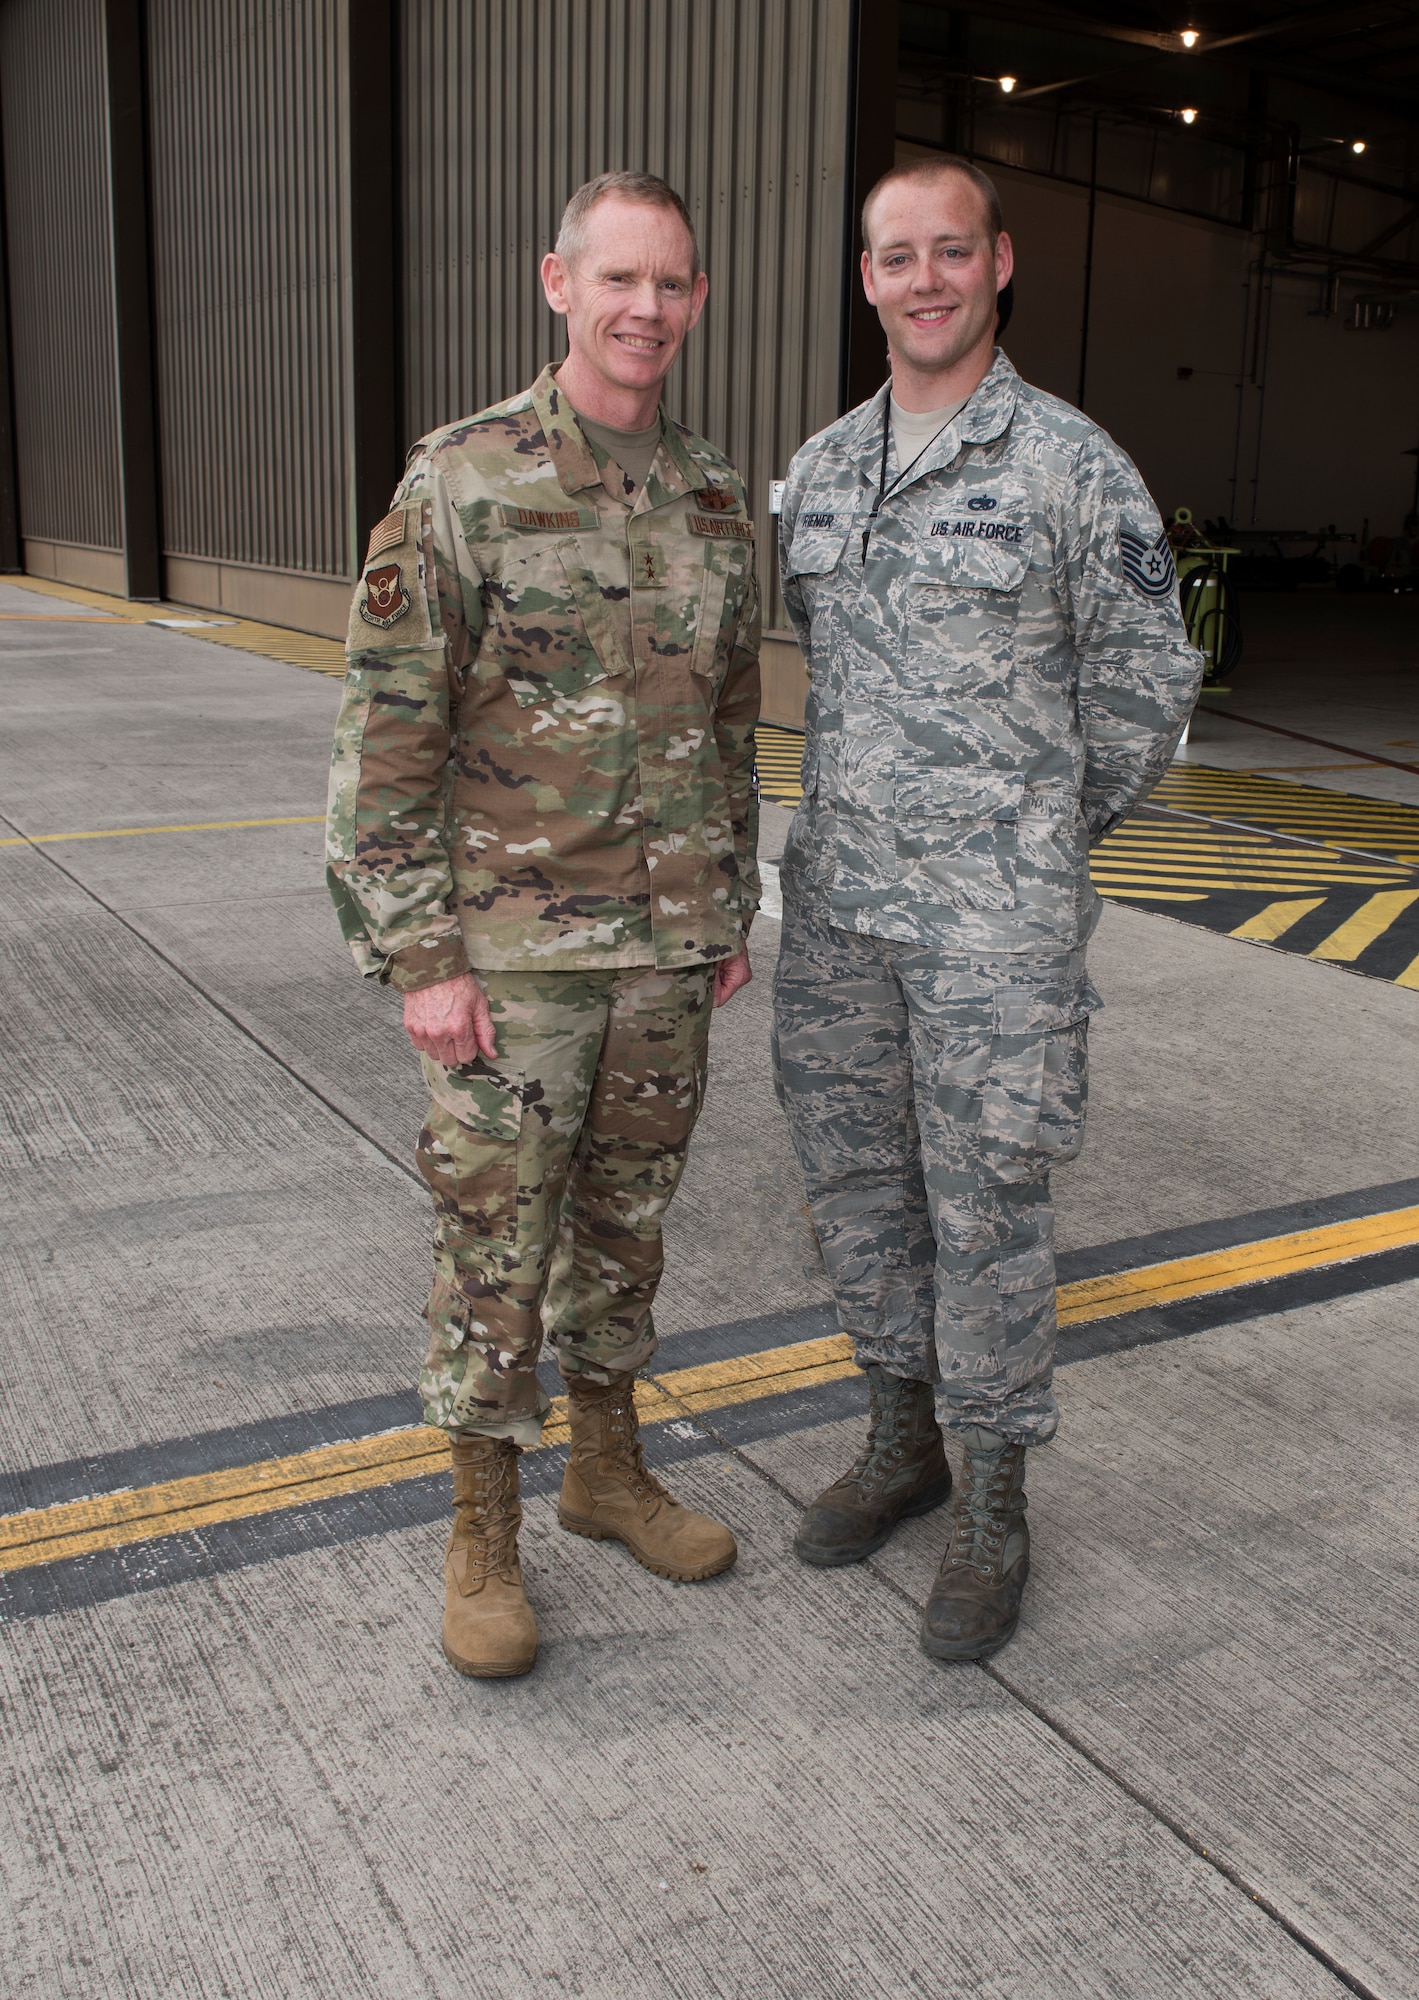 Major General James Dawkins Jr., Eighth Air Force commander, poses for a photo with Technical Sergeant Erik Riener, an aerospace ground equipment member assigned to the 509th Aircraft Maintenance Squadron at Whiteman Air Force Base, Missouri, on August 27, 2019, at Royal Air Force Base Fairford, England. Riener and other members of Team Whiteman, along with along strategic partners have deployed as part of a Bomber Task Force to the European Command area of operations to conduct theater integration and flying training. (U.S. Air Force photo by Staff Sgt. Kayla White)